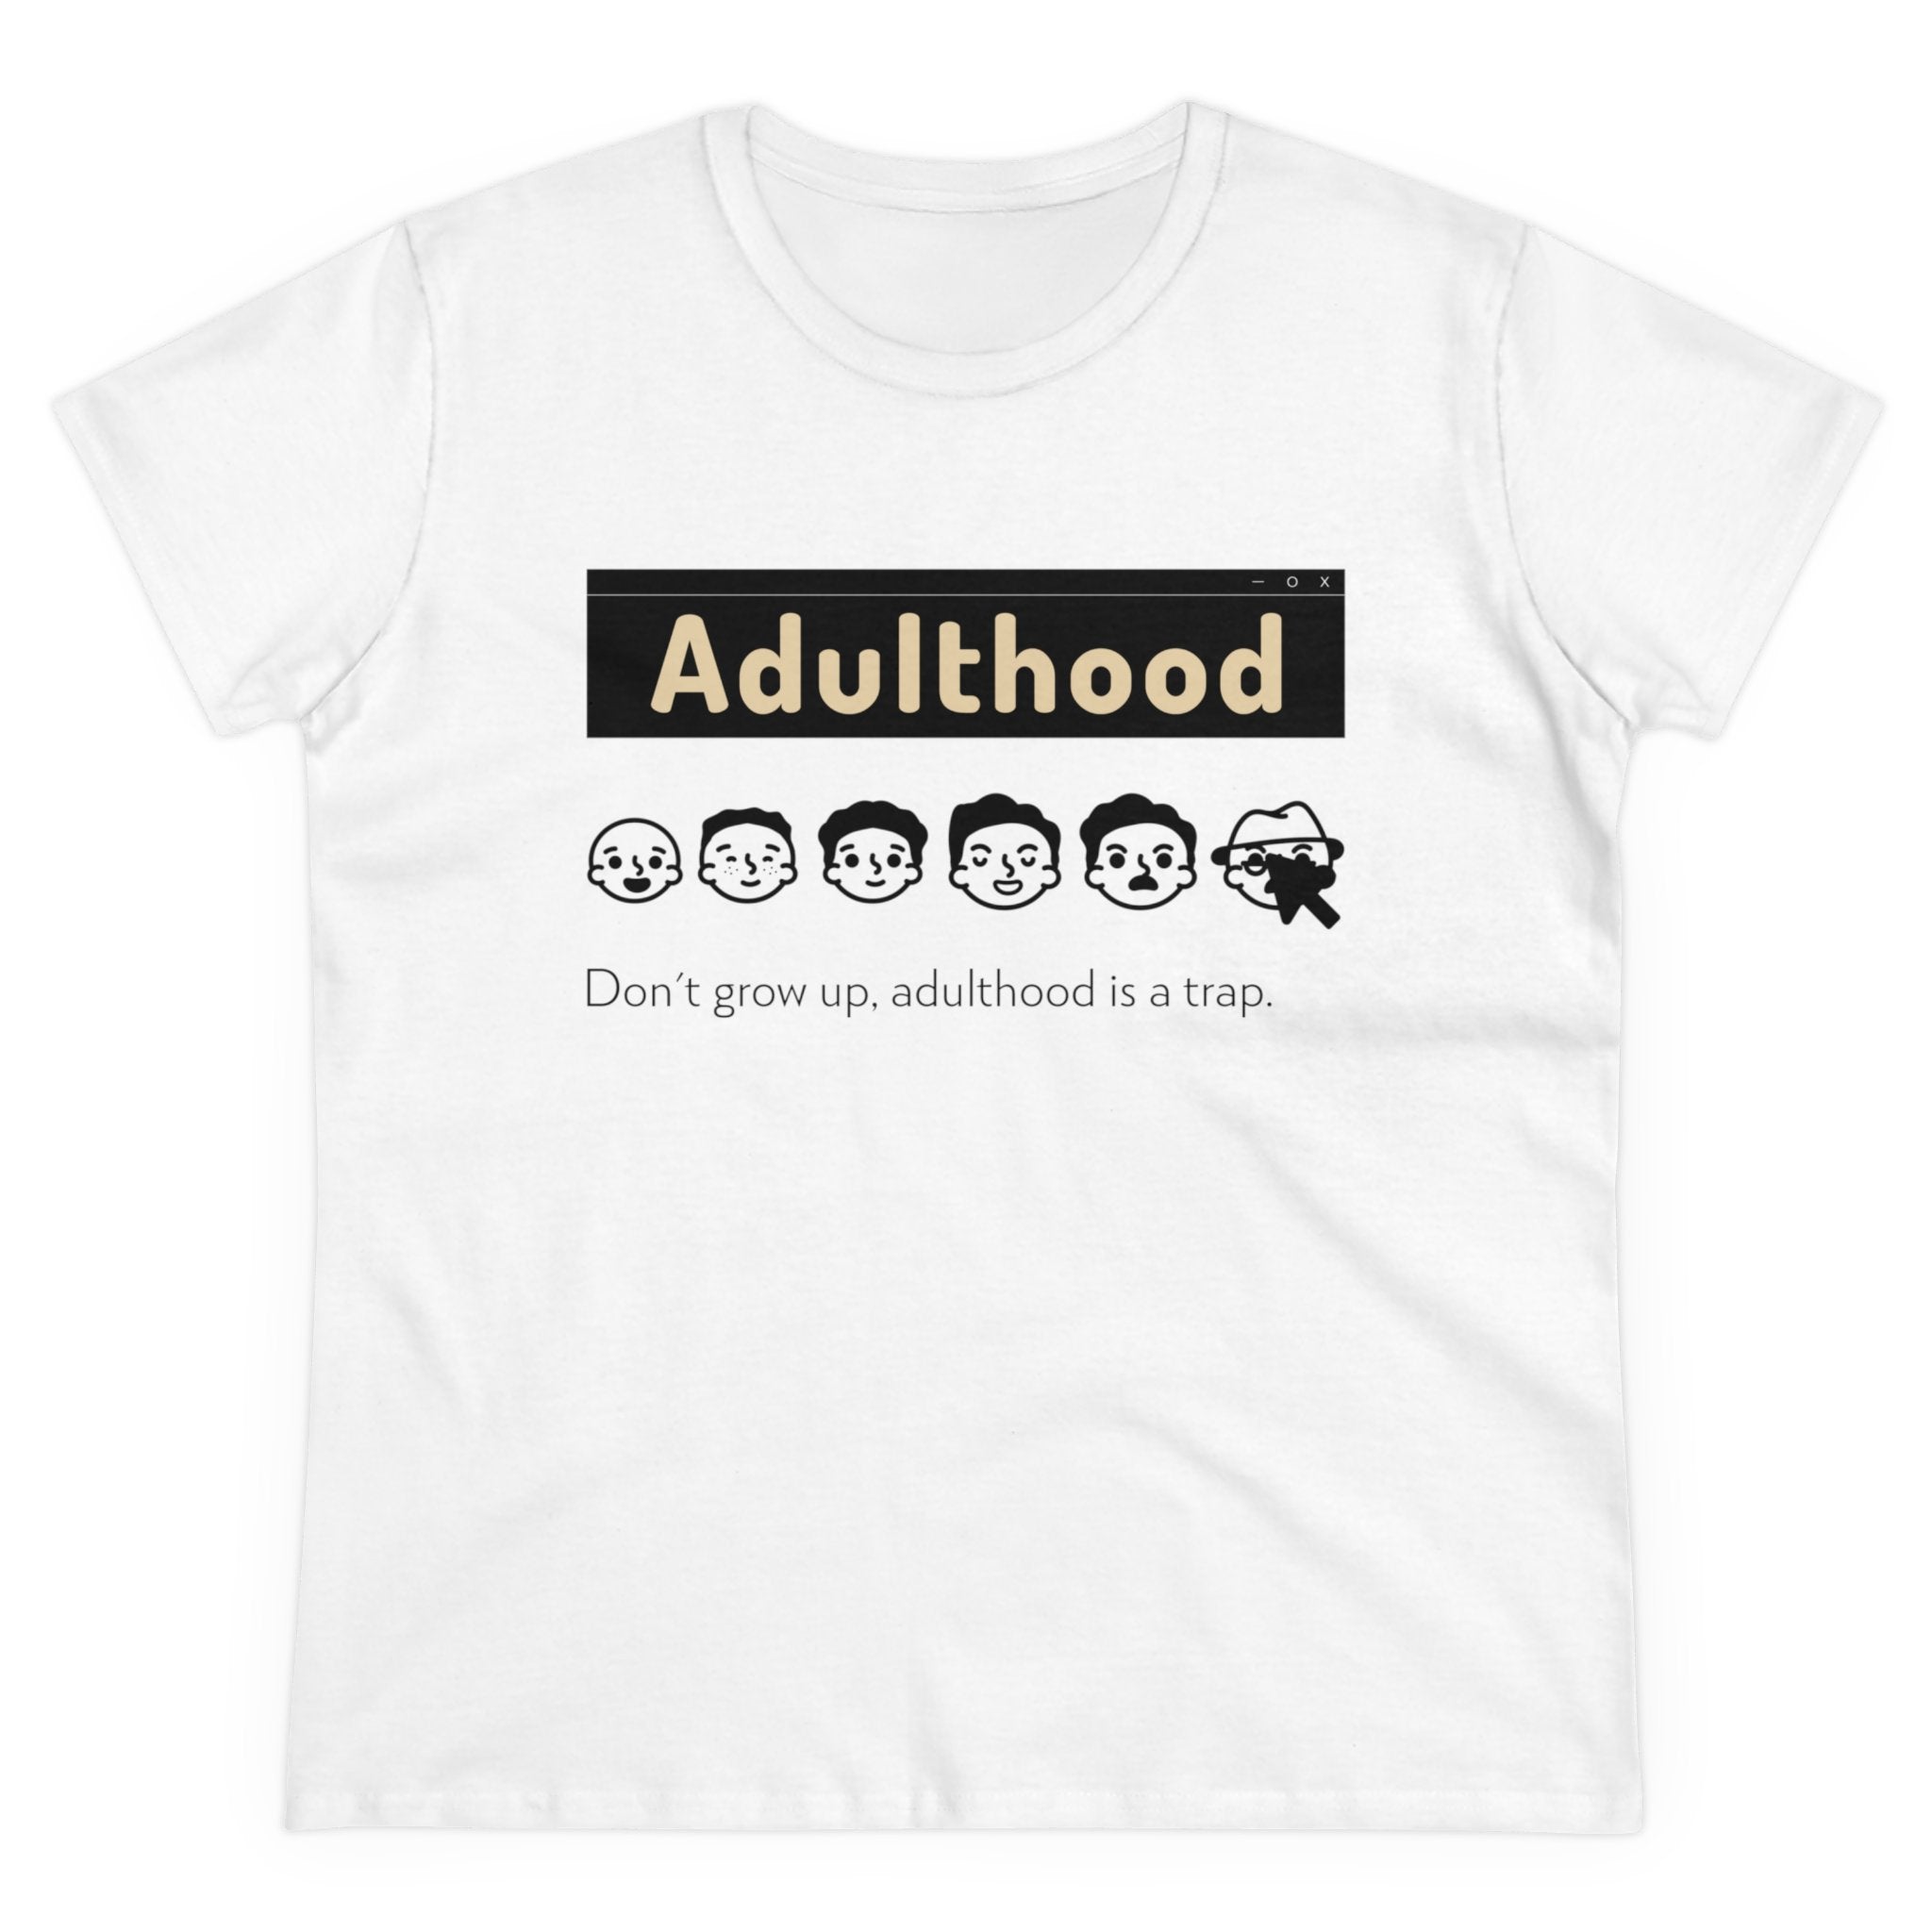 Adulthood is a Trap - Women's Tee